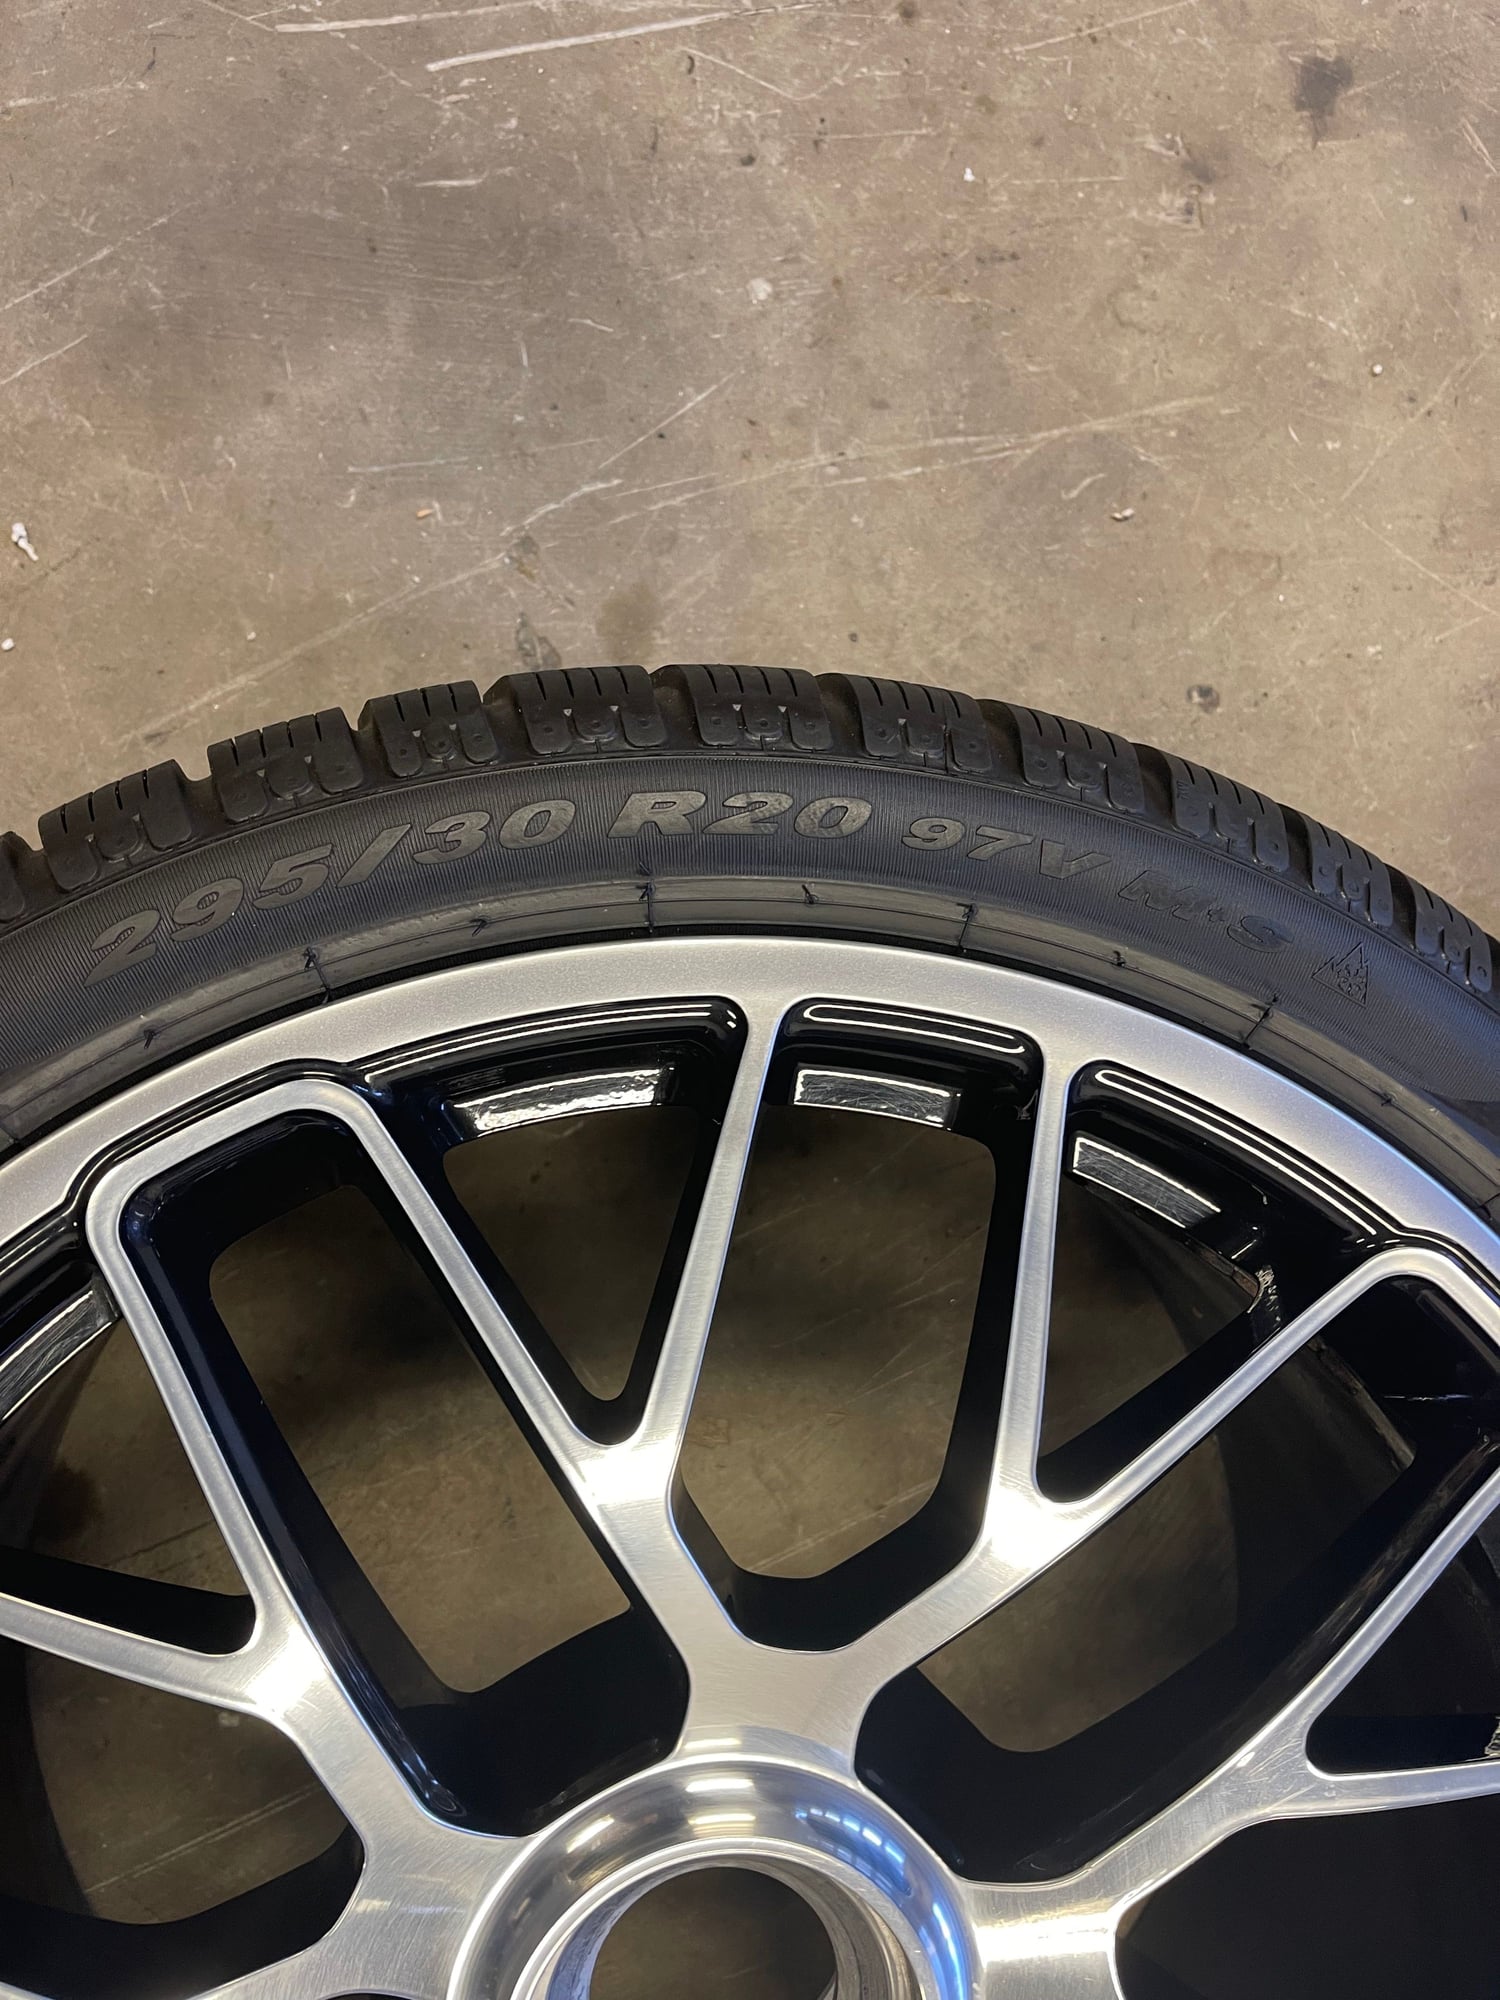 Wheels and Tires/Axles - 991.1 Turbo S Center Lock wheels with Pirelli Sottozero M&S tires - Used - 2014 to 2016 Porsche 911 - Hudson, NH 03051, United States